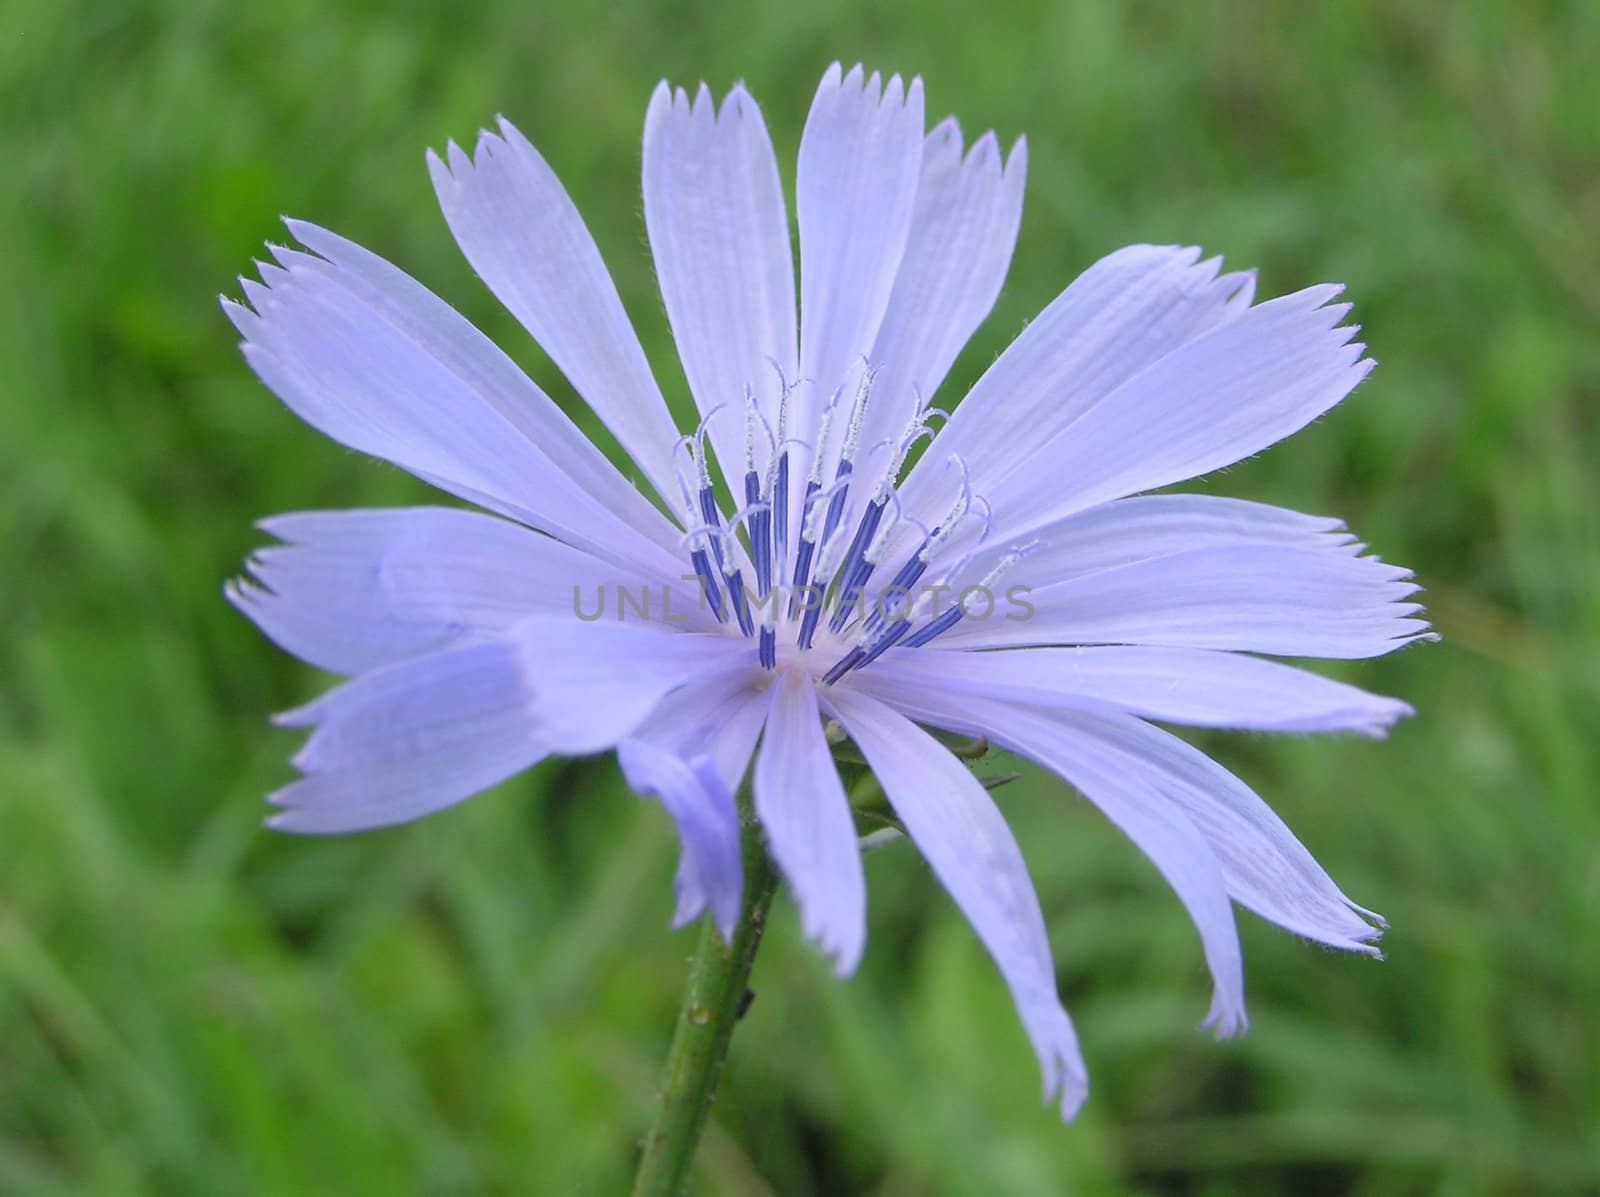 Light-blue chicory flower by Rbox